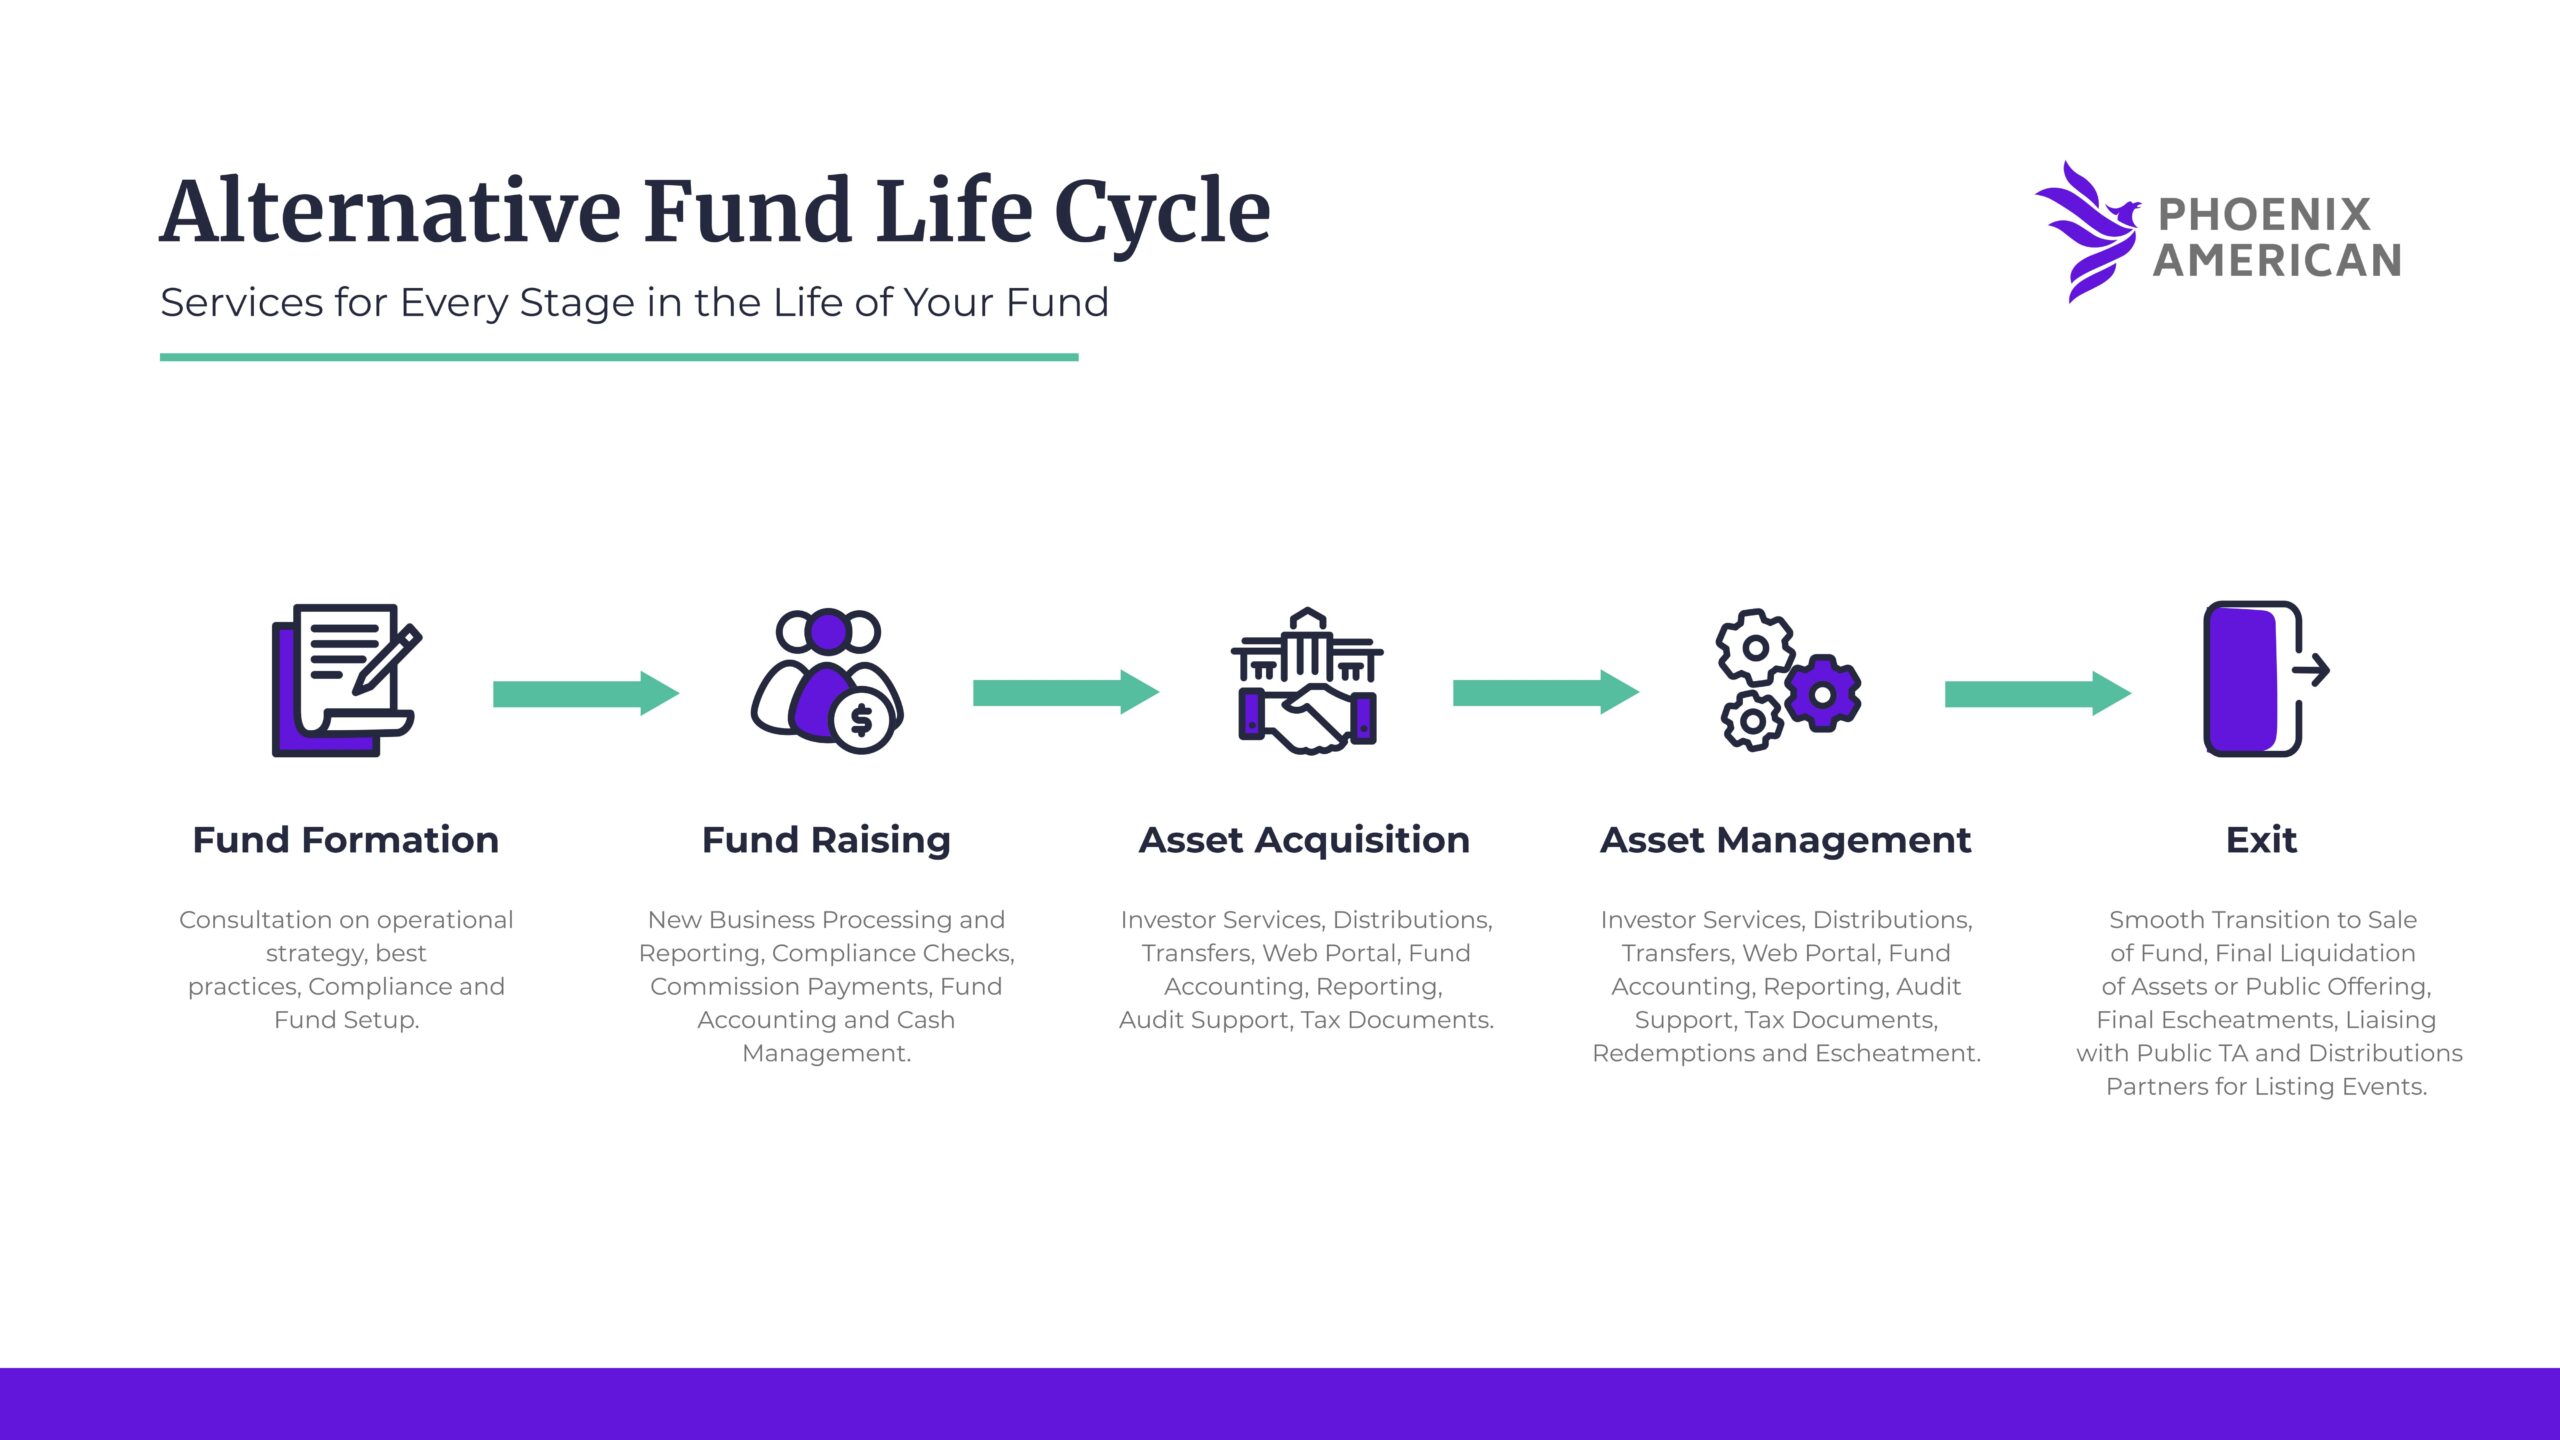 This flowchart captures the alternative fund life cycle.